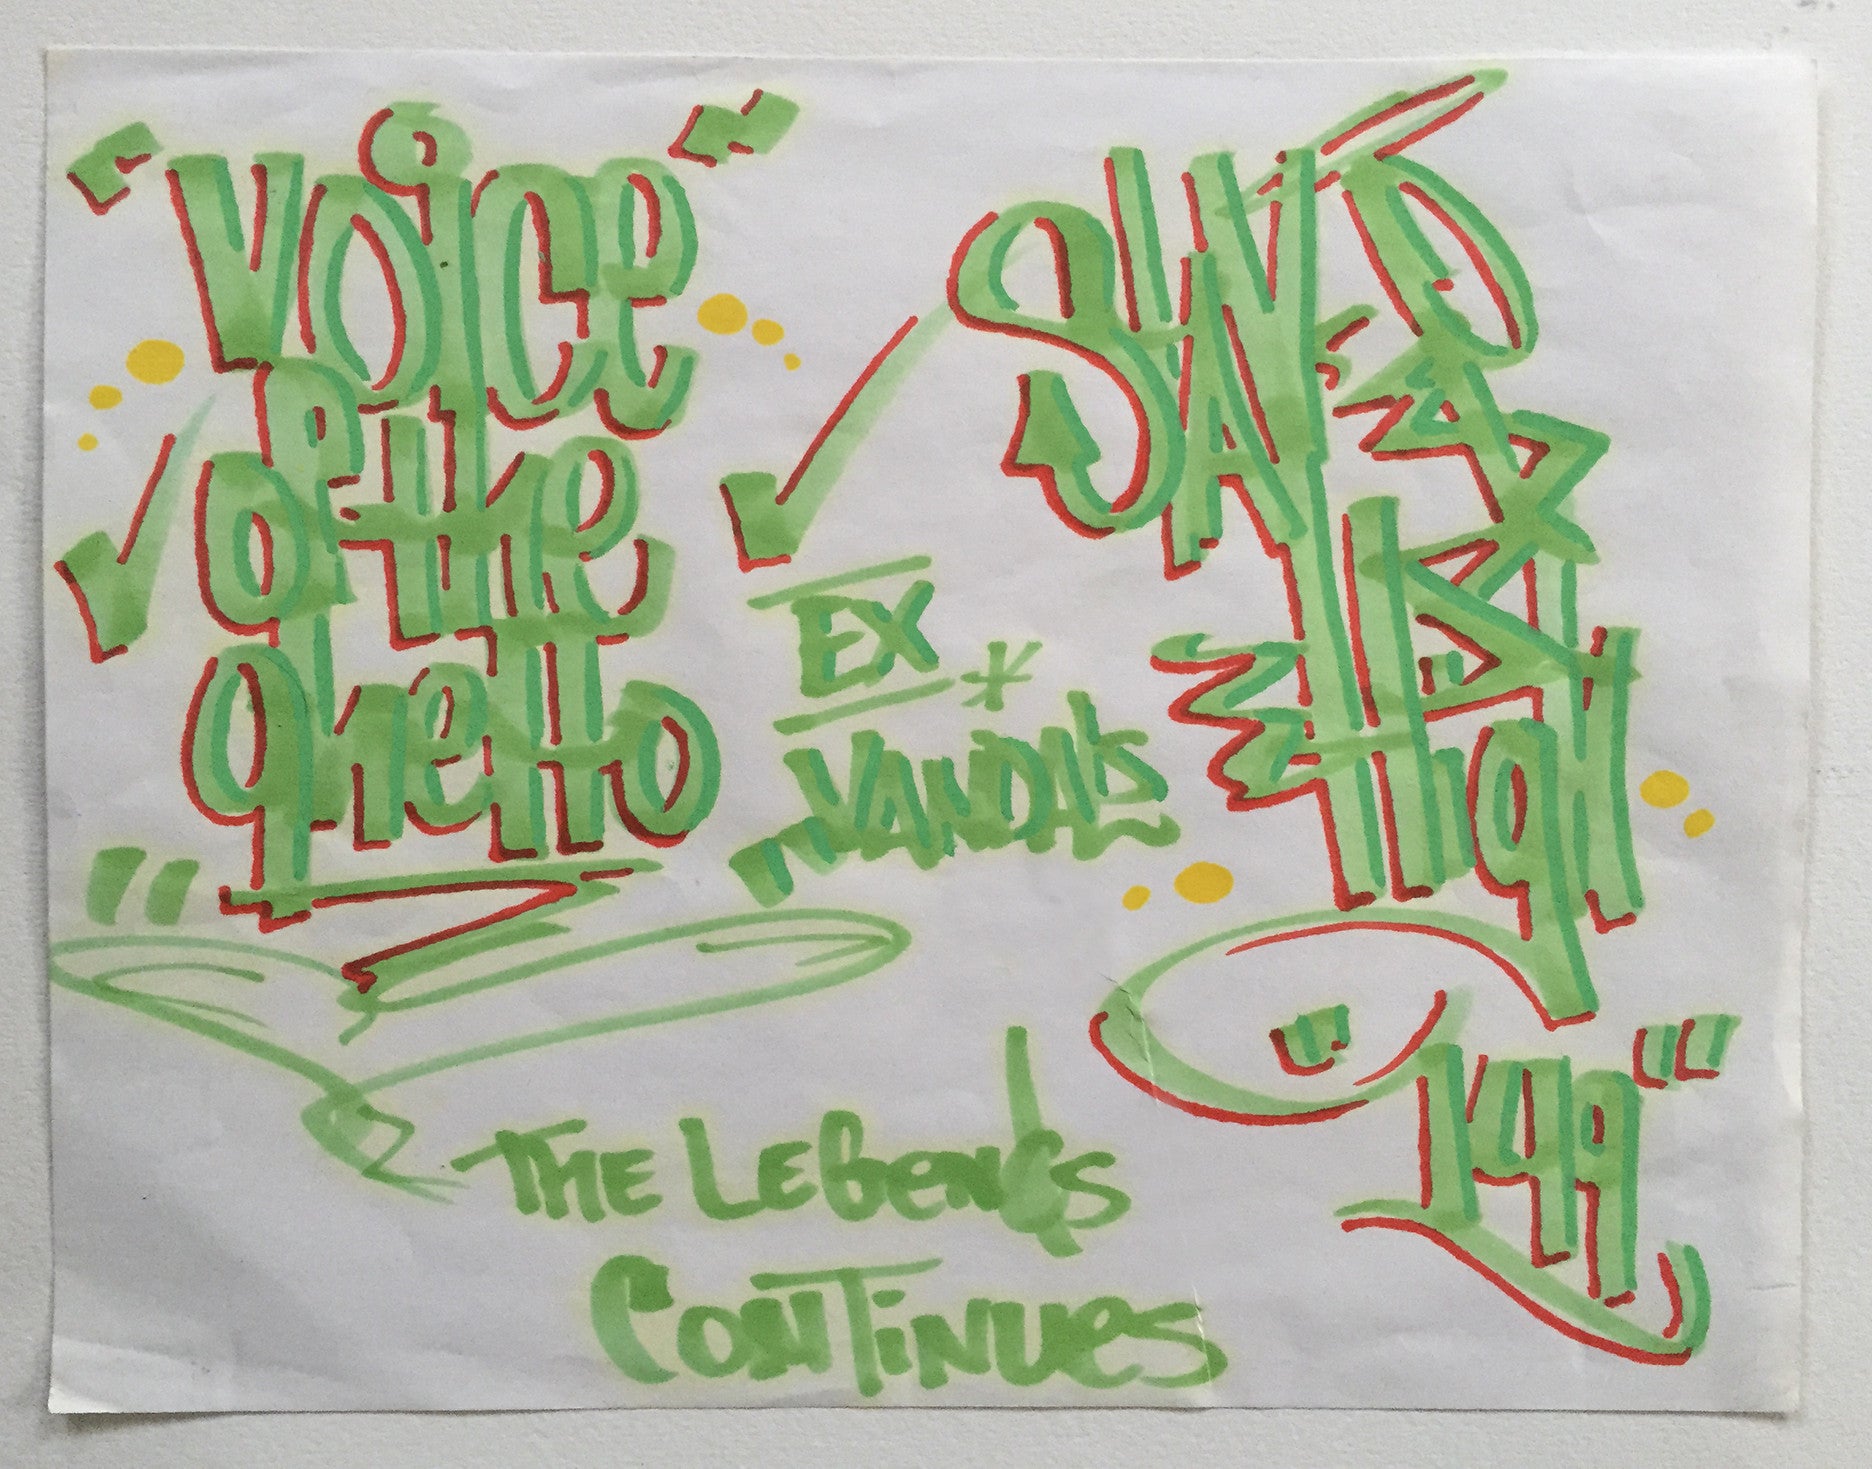 STAYHIGH 149 - " Stayhigh/Voice of the Ghetto" Black Book